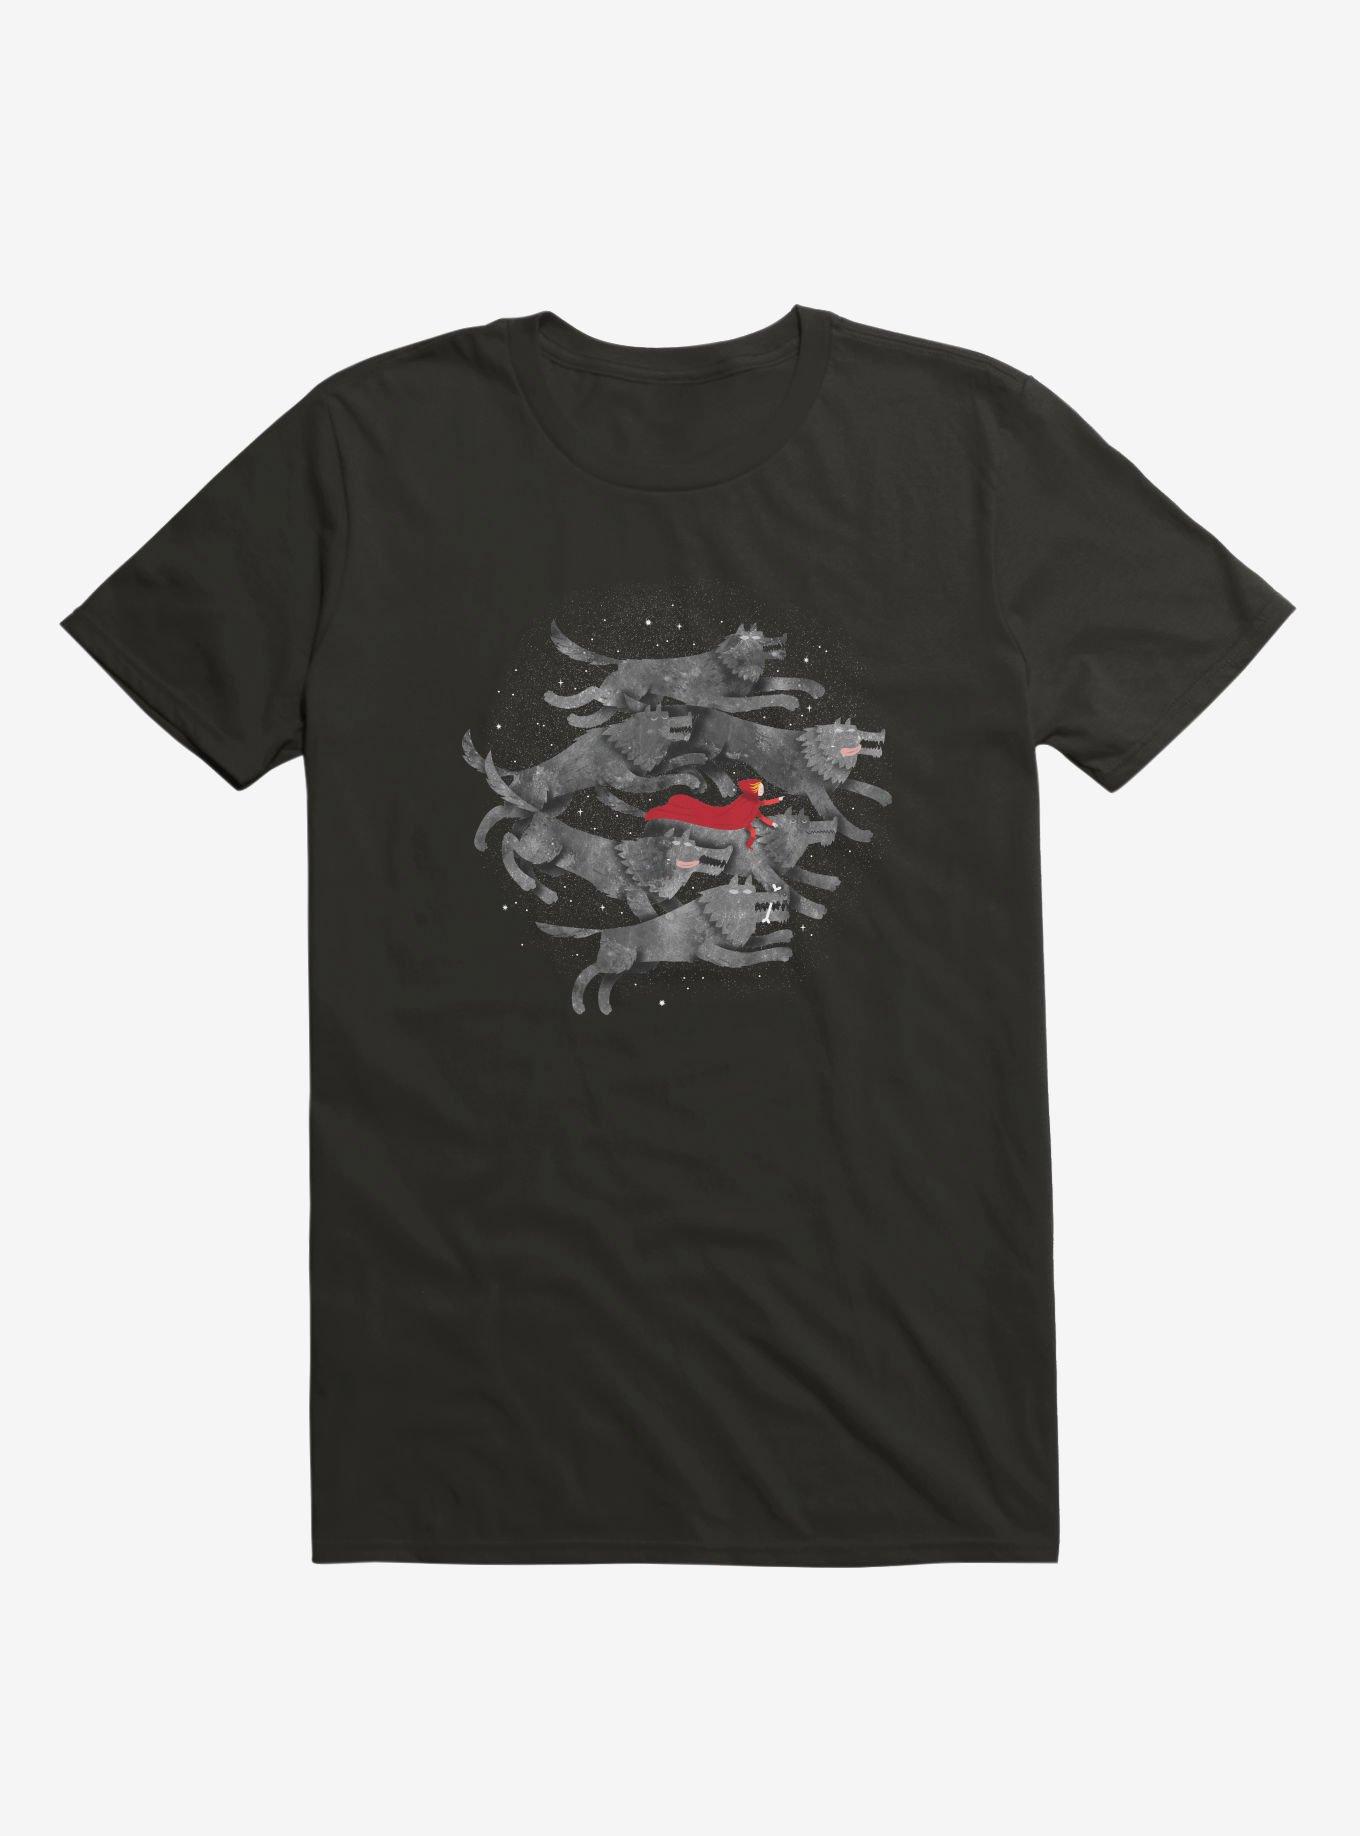 Run with the Pack T-Shirt